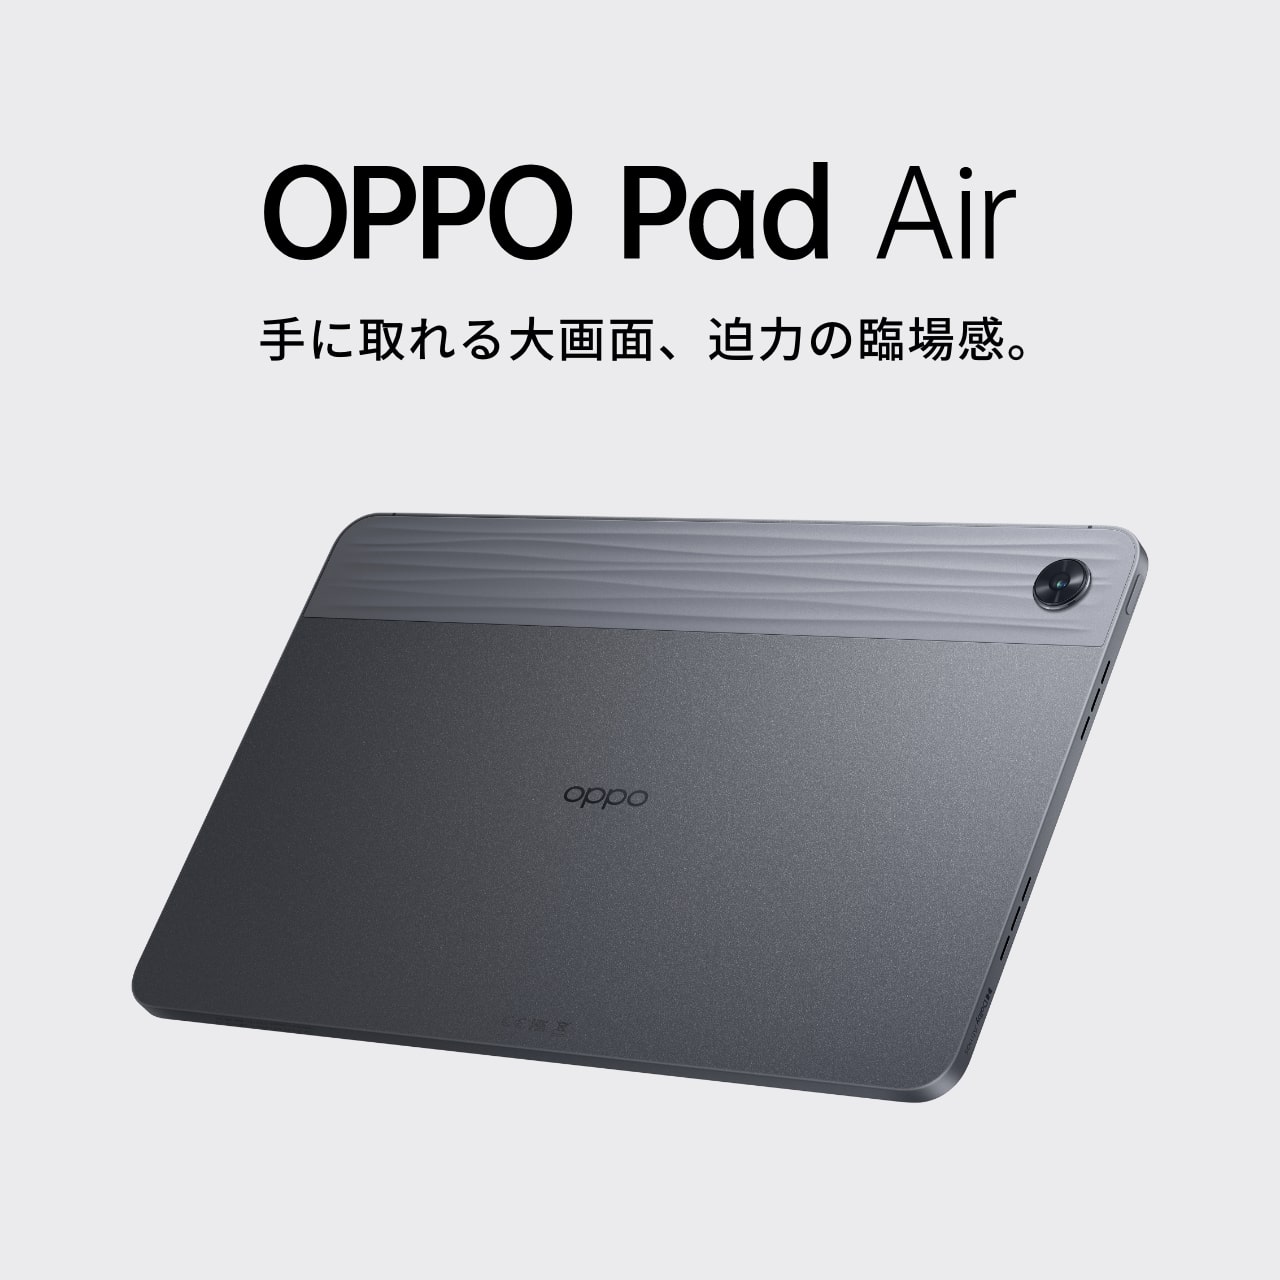 OPPO Pad Air タブレット（初期化済み）